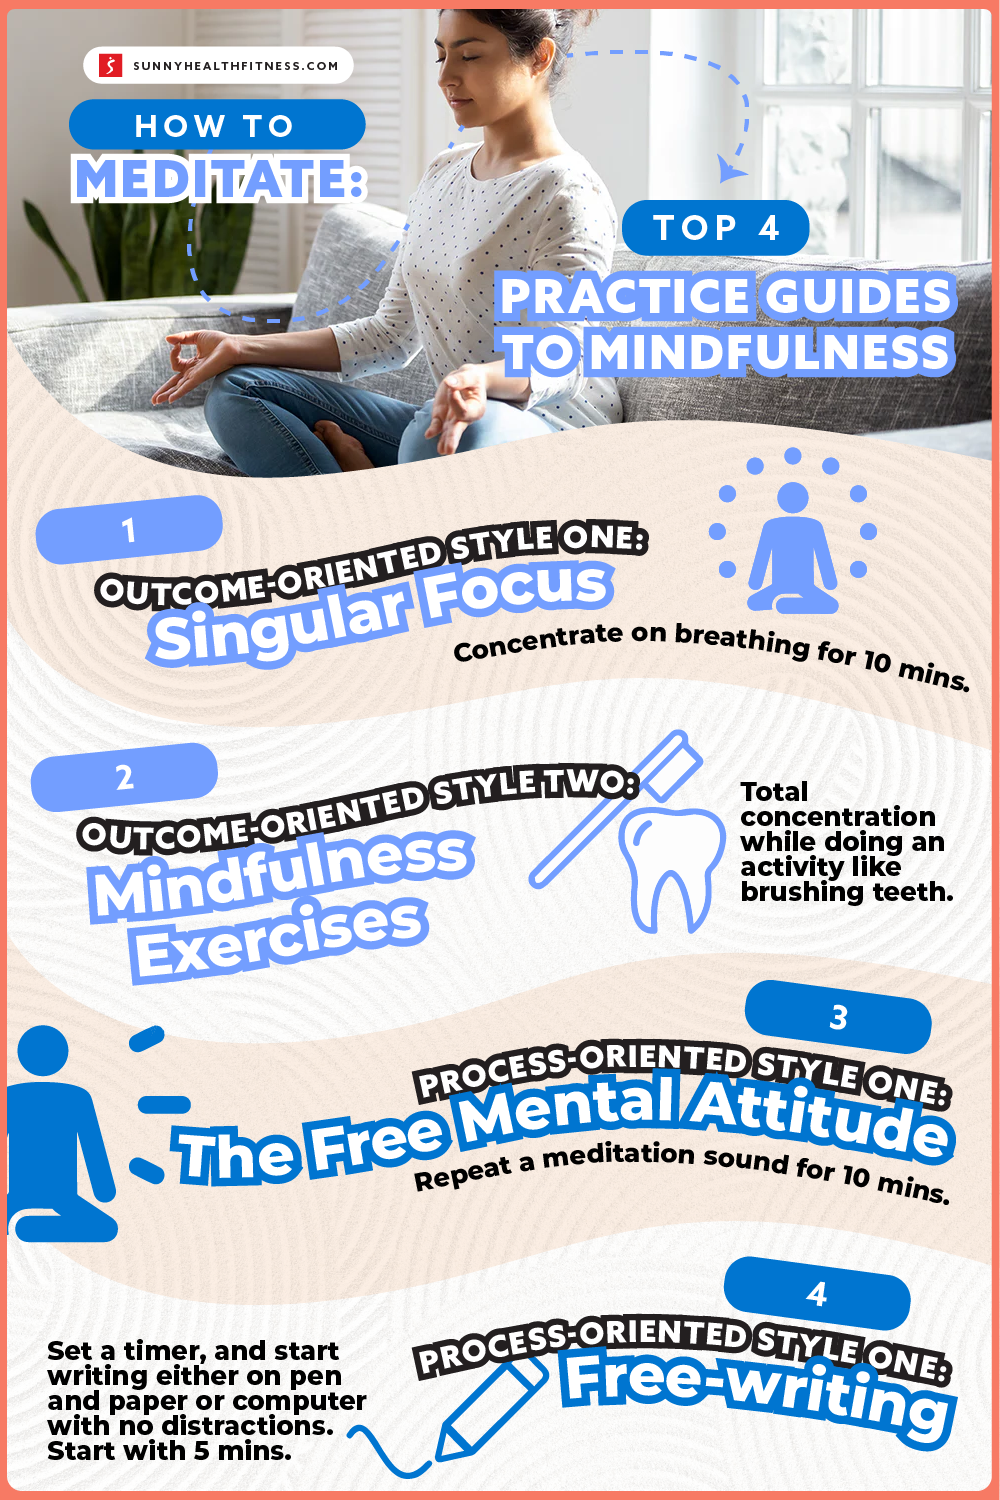 How to Meditate: Top 4 Practice Guides to Mindfulness